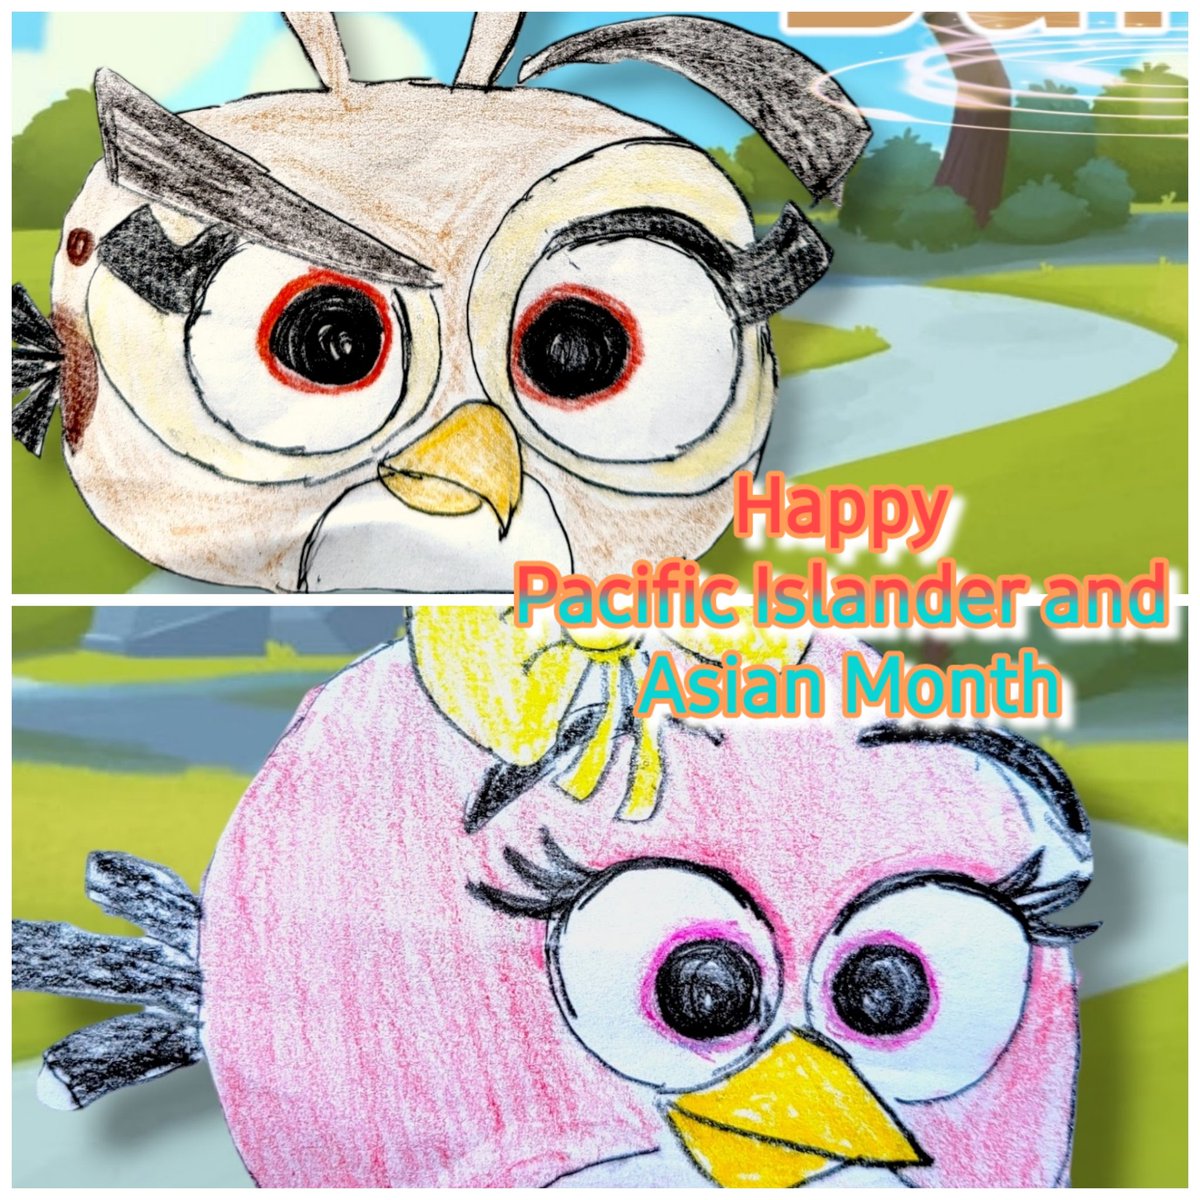 Happy Asian American and Pacific Islander Heritage Month. Here are my two beautiful bird ladies, Dahlia and Ruby. #AngryBirds #AsianHeritageMonth #PacificIslanderheritageMonth